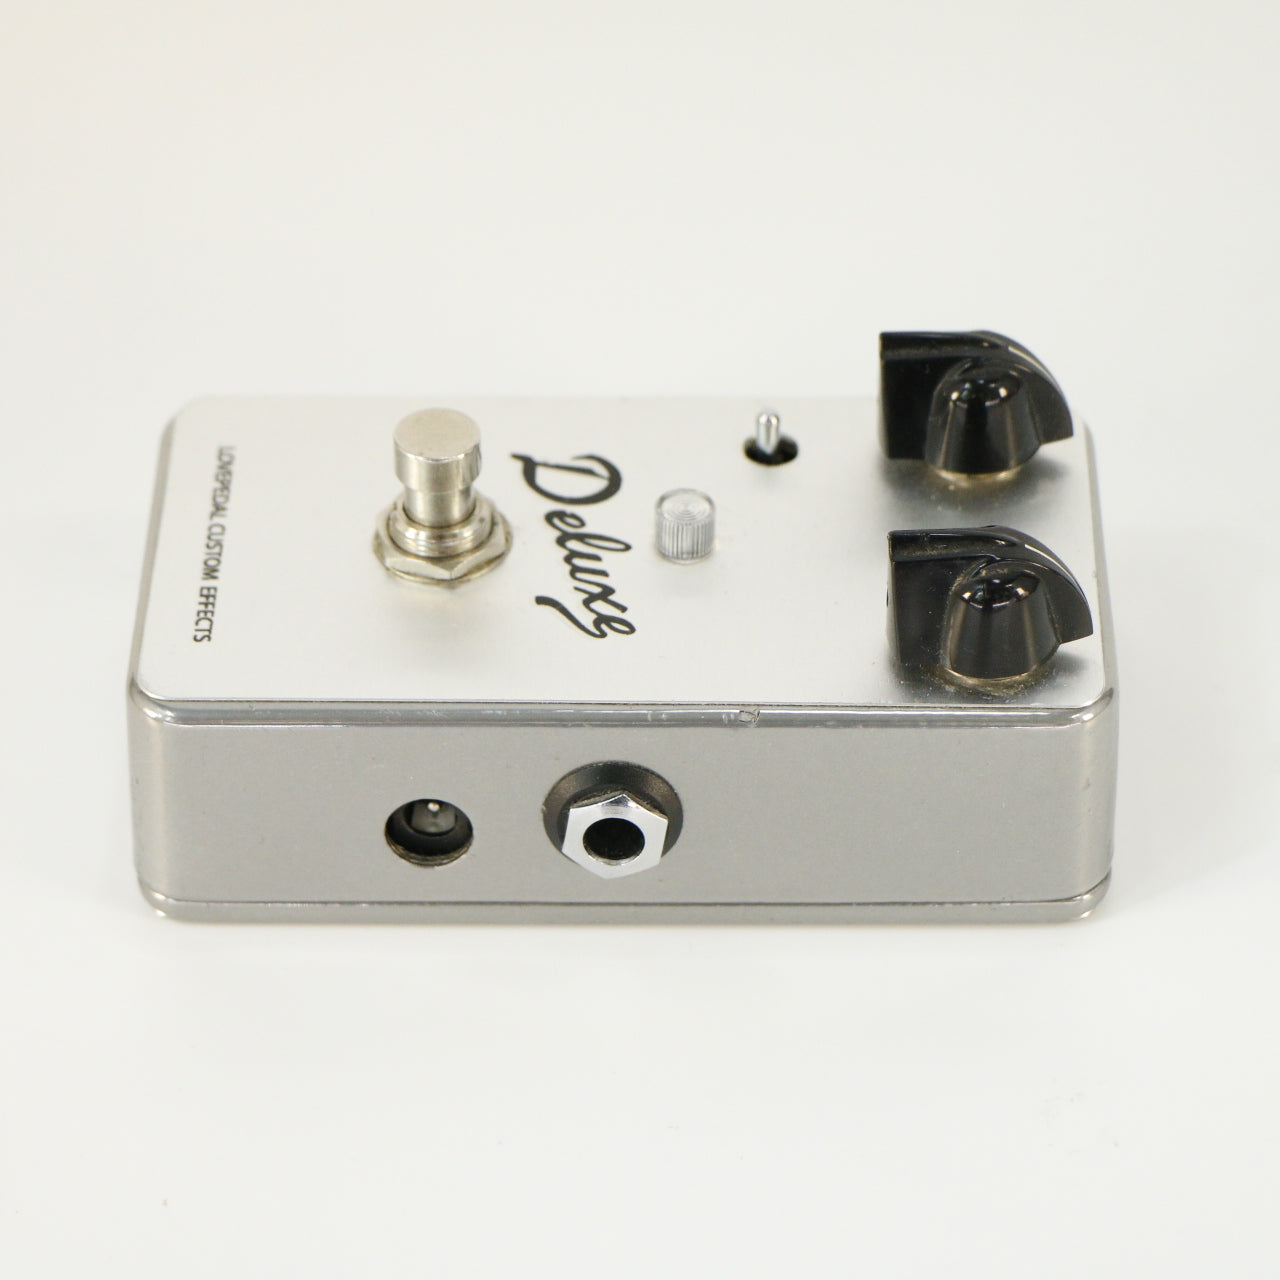 Lovepedal Custom Effects 5E3 Deluxe Overdrive / Preamp (Silver Enclosure)